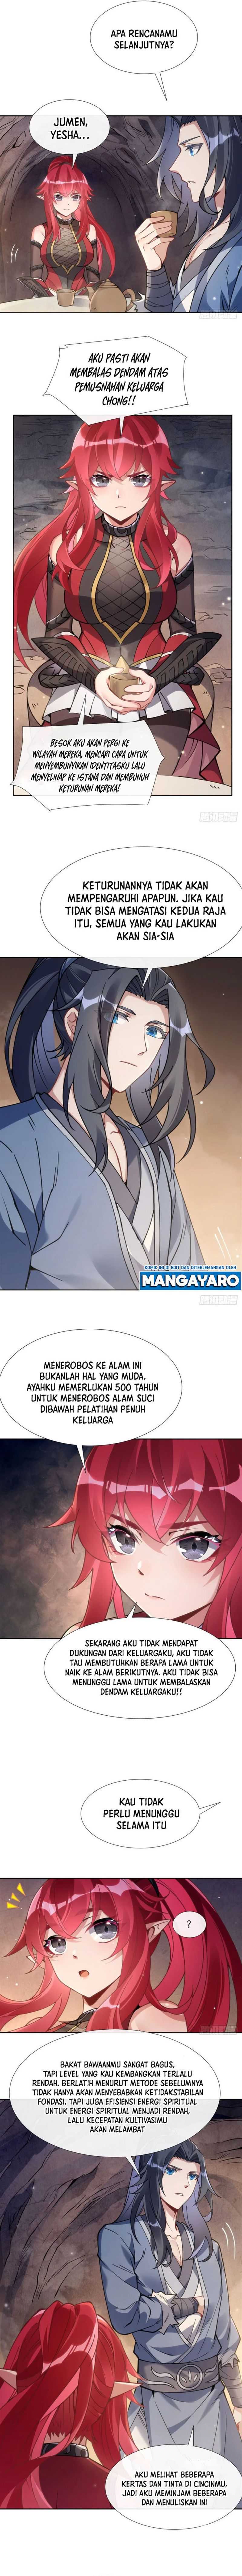 Dilarang COPAS - situs resmi www.mangacanblog.com - Komik my female apprentices are all big shots from the future 152 - chapter 152 153 Indonesia my female apprentices are all big shots from the future 152 - chapter 152 Terbaru 3|Baca Manga Komik Indonesia|Mangacan